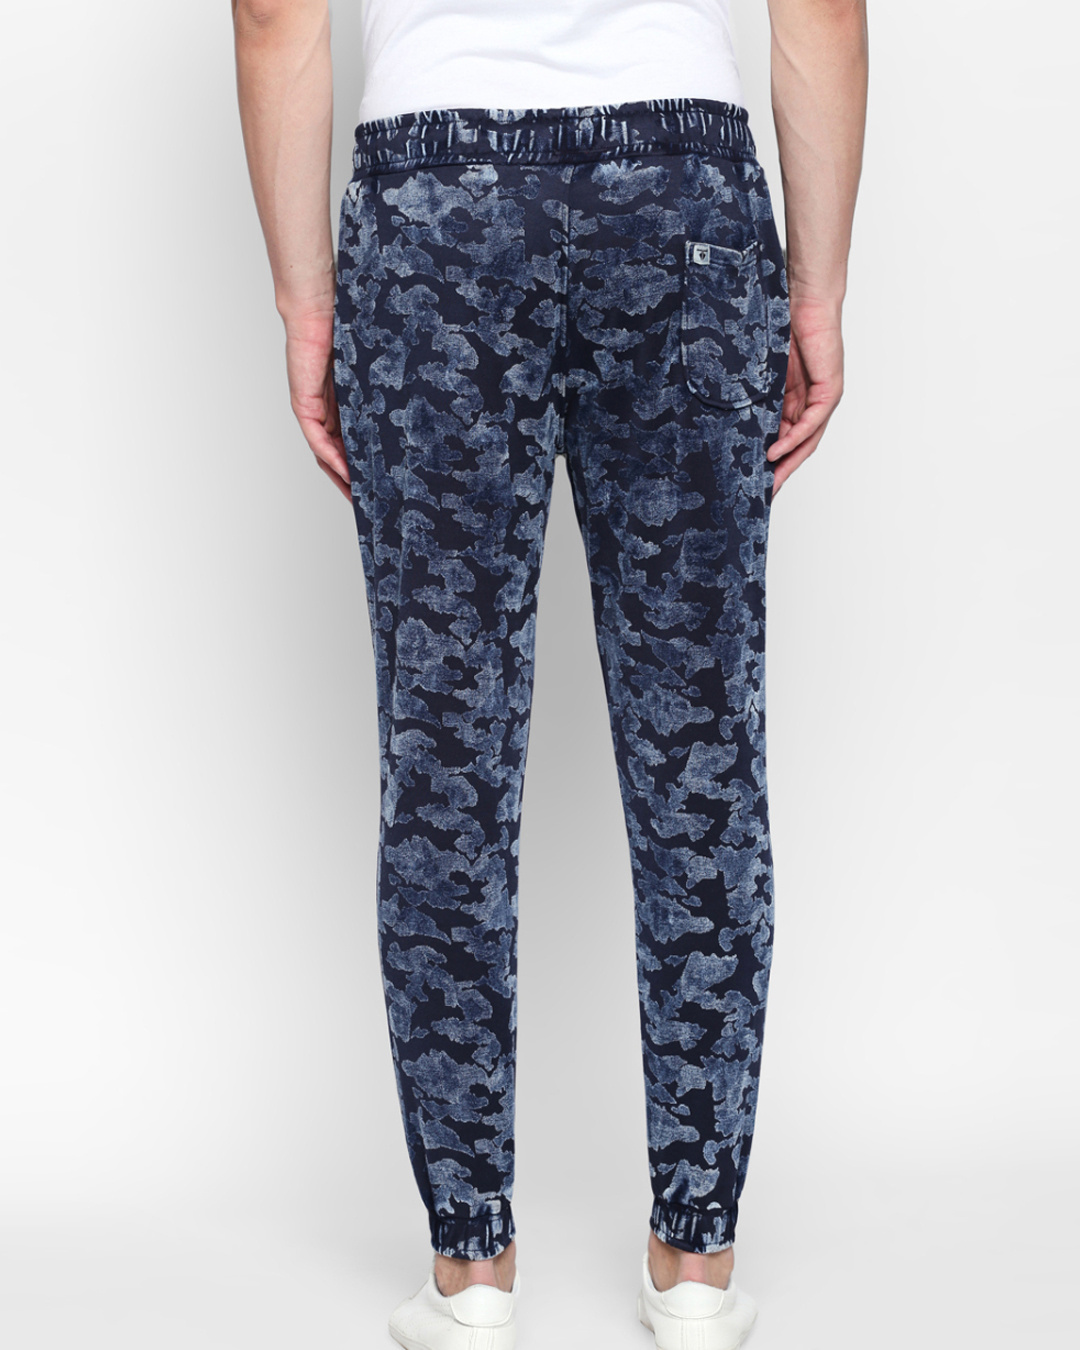 Shop Navy Camouflage Pattern Cotton Joggers For Men's-Back